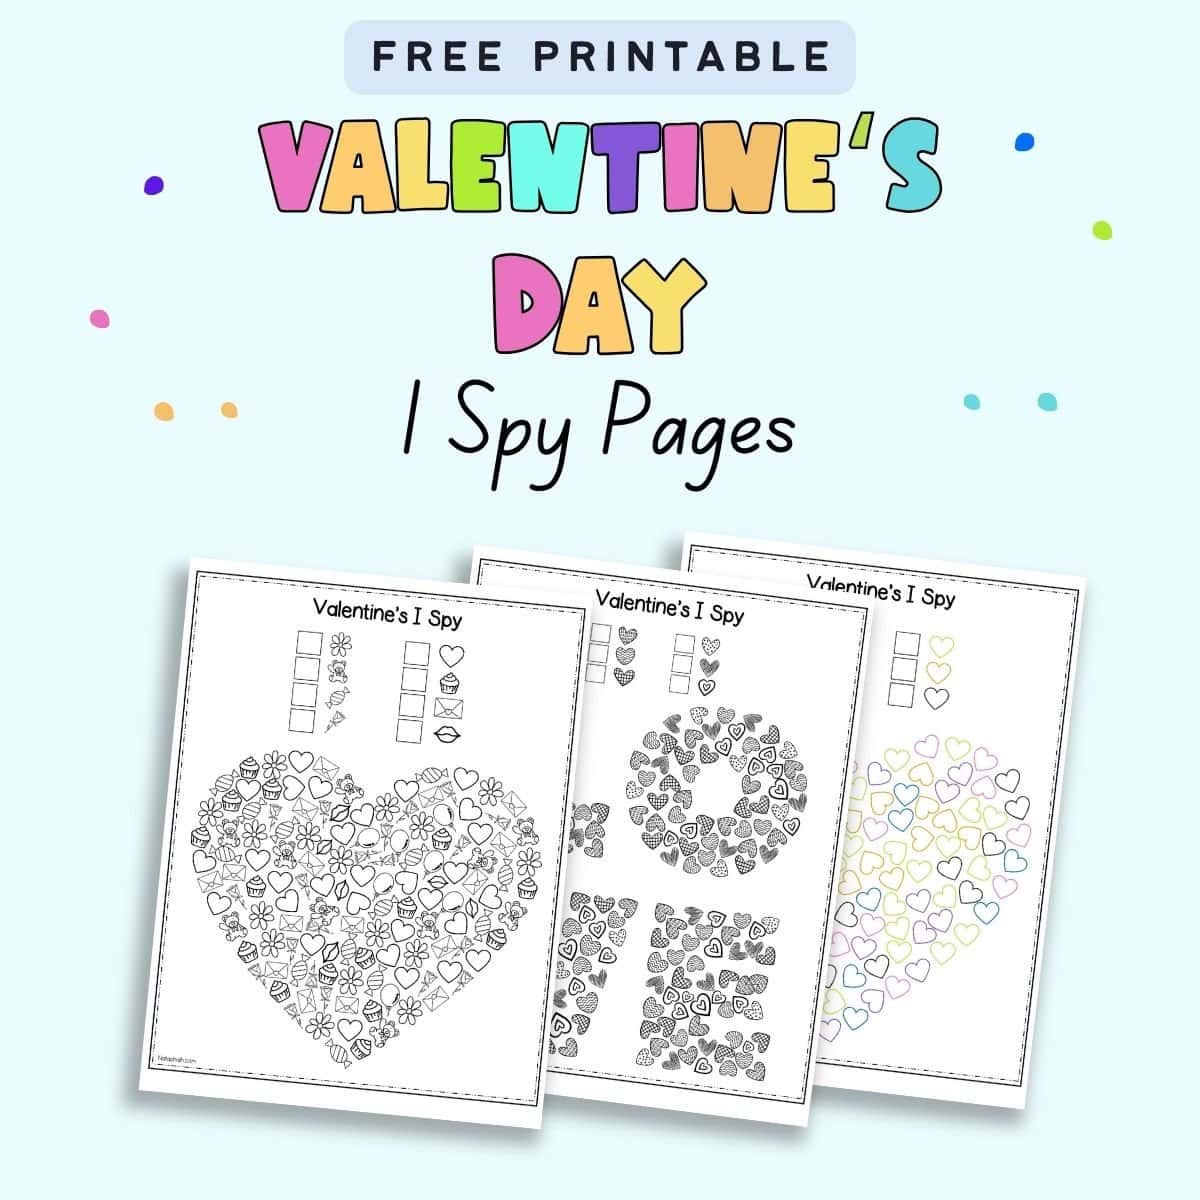 Text "free printable Valentine's Day I Spy pages" with a preview of three pages